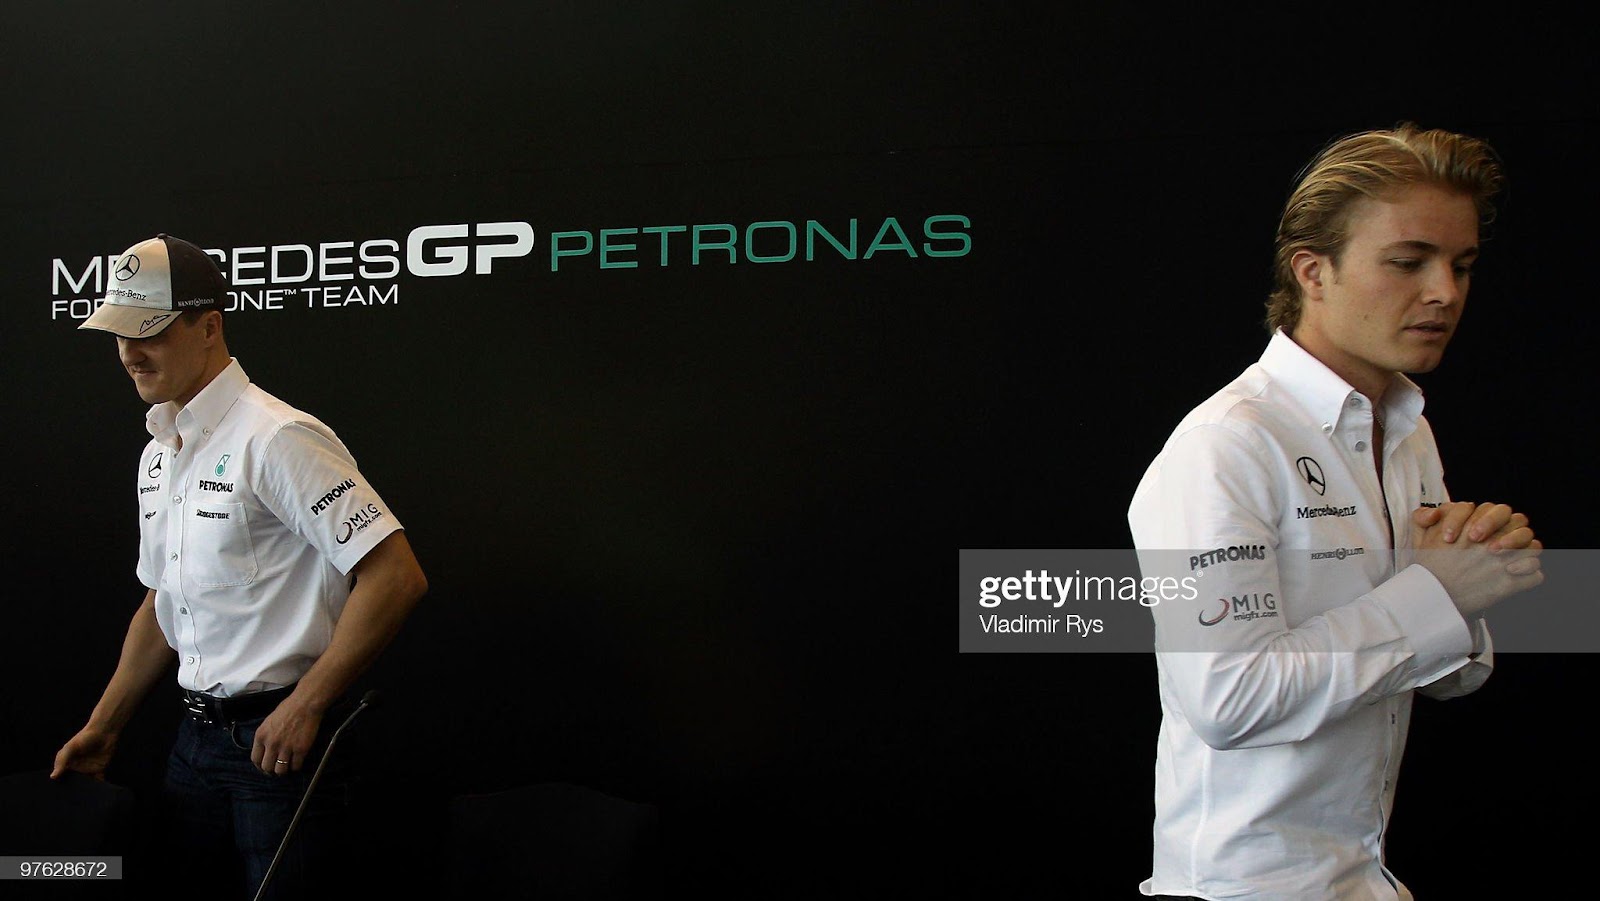 Michael Schumacher, Mercedes GP, with Nico Rosberg, Mercedes GP, appear at a media breakfast press conference on March 11, 2010 in Manama, Bahrain.